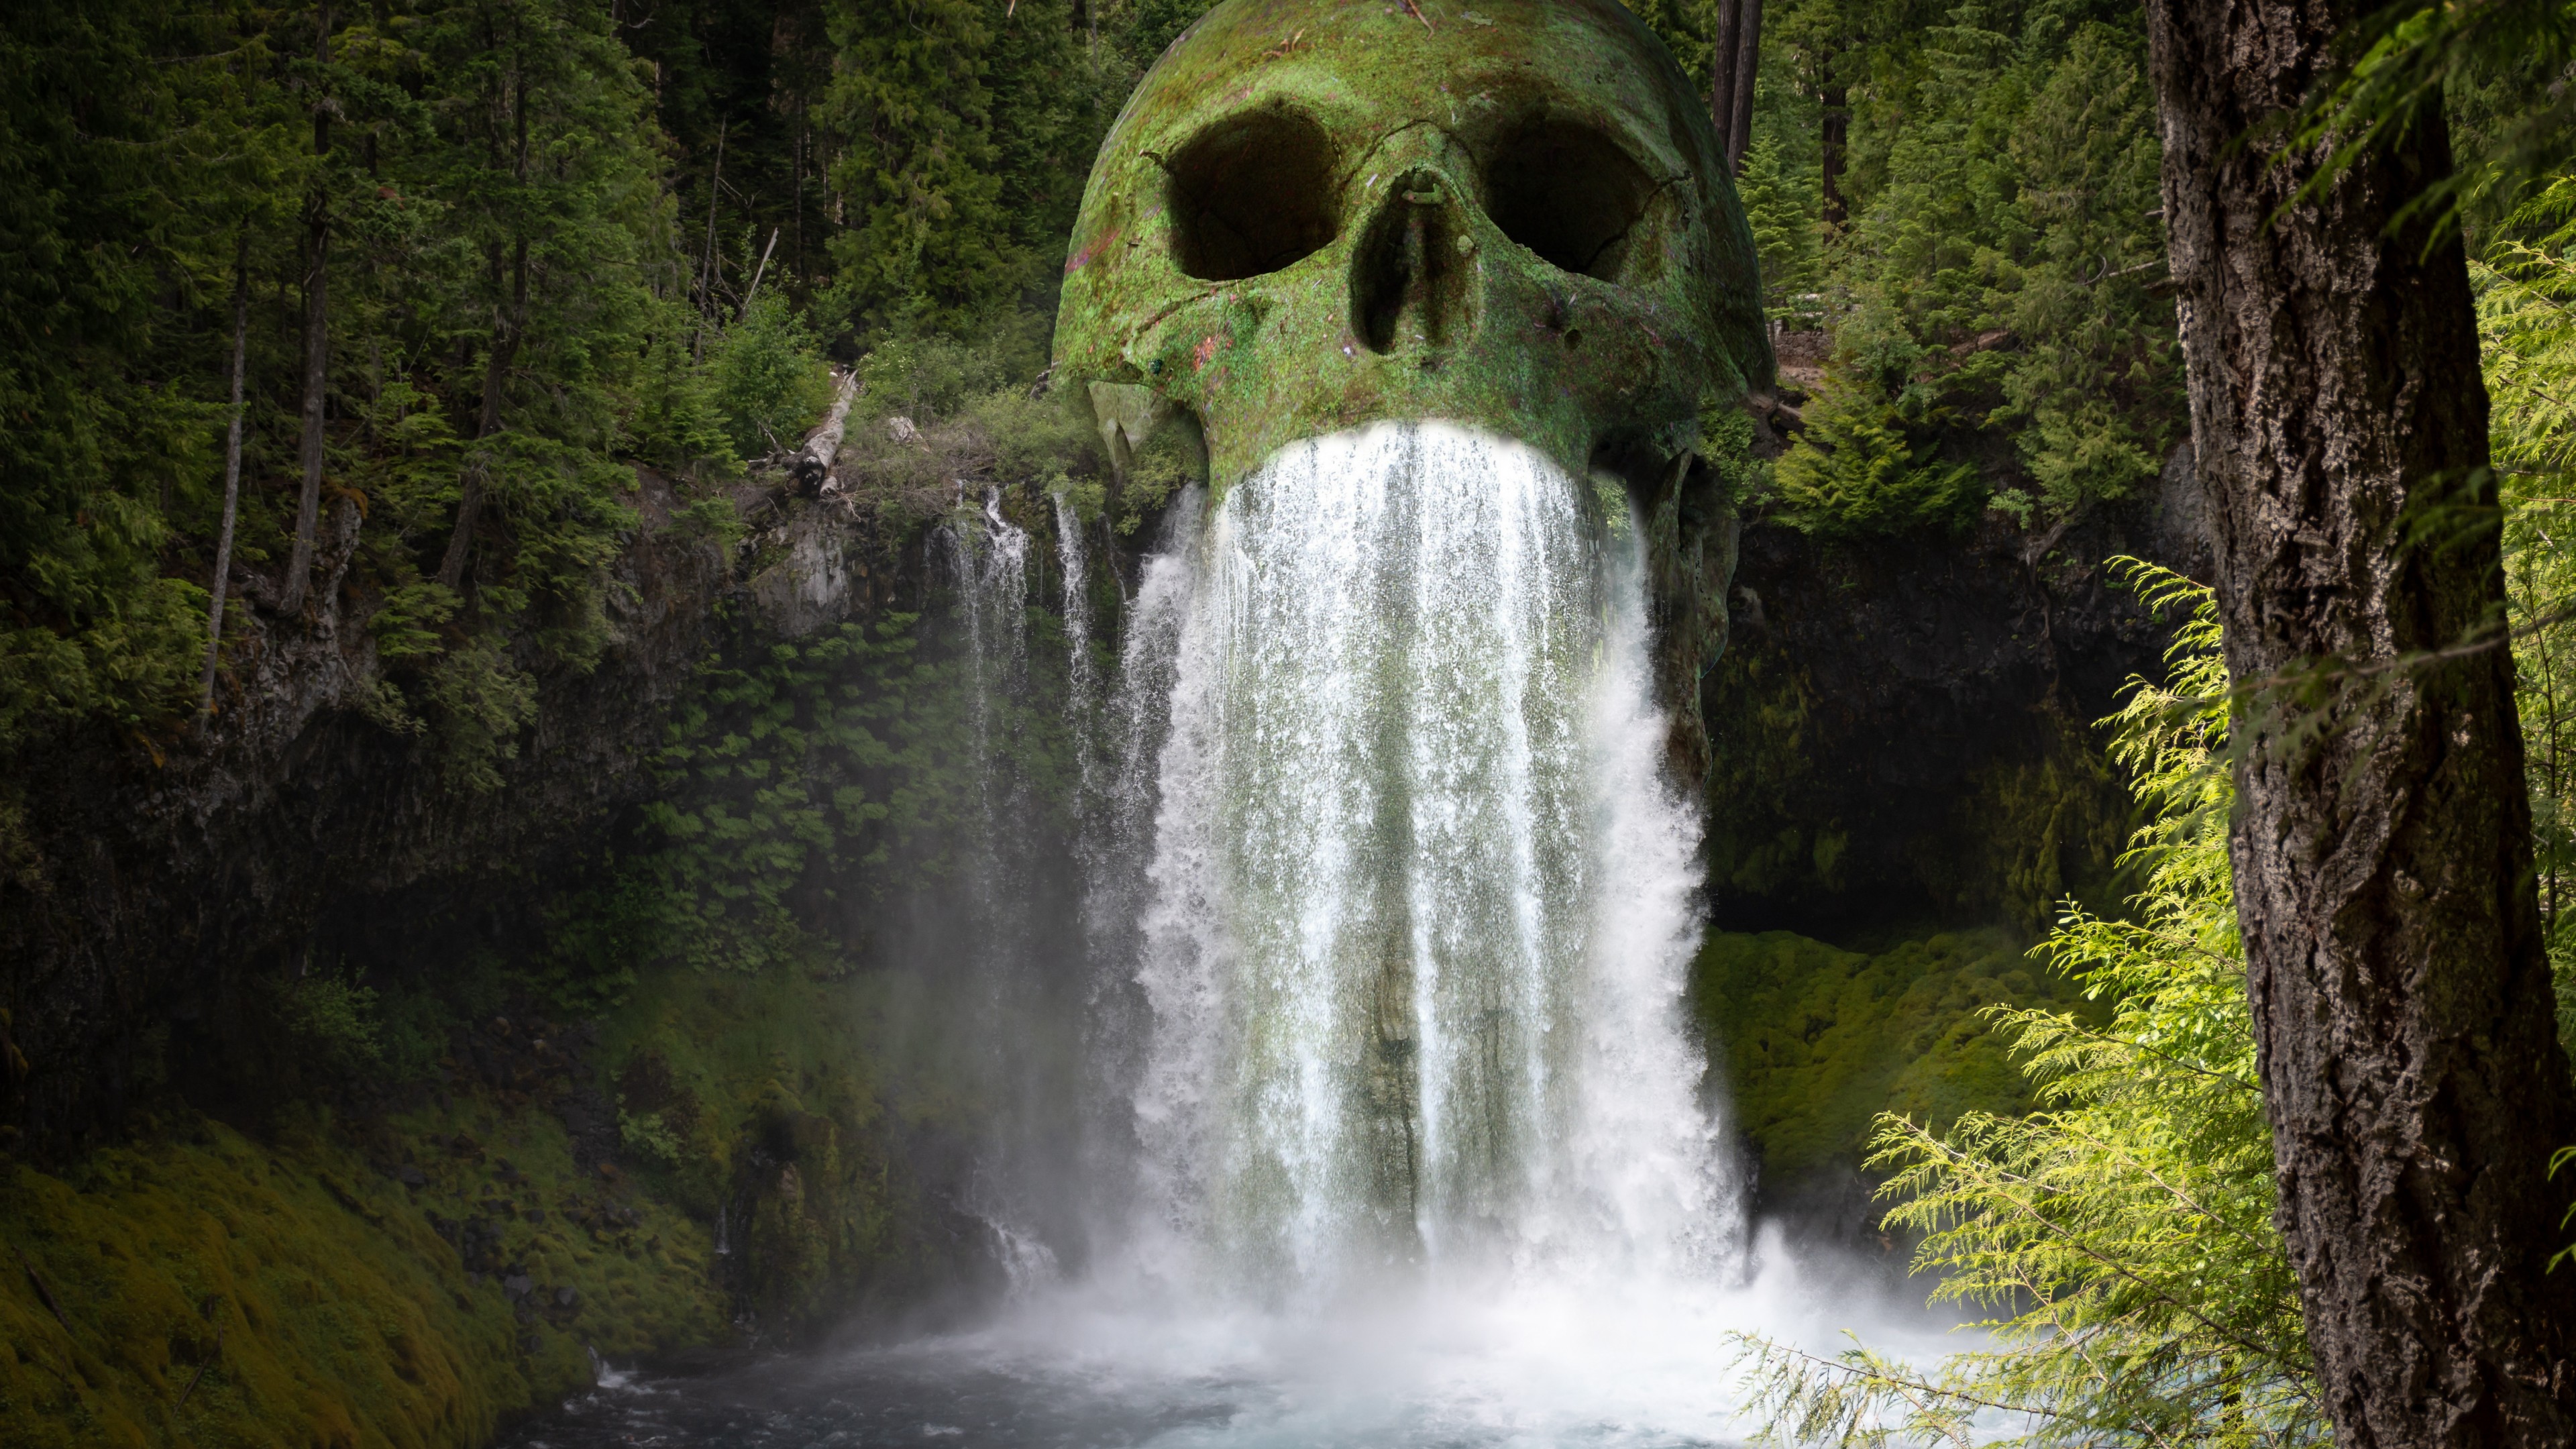 General 3840x2160 skull waterfall nature water green forest creepy surreal